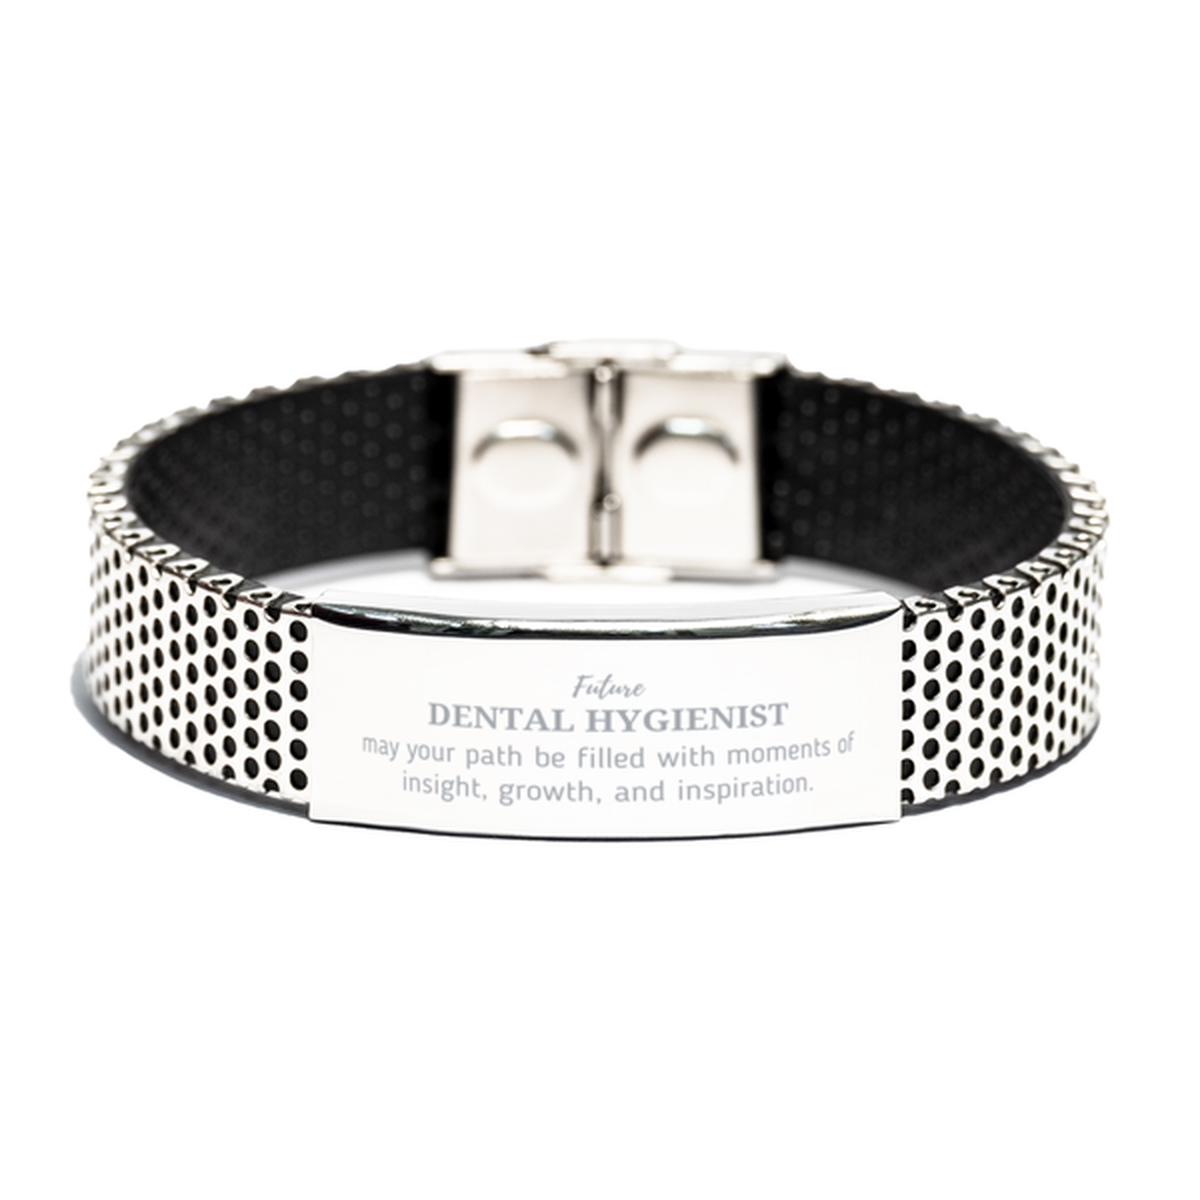 Future Dental Hygienist Gifts, May your path be filled with moments of insight, Graduation Gifts for New Dental Hygienist, Christmas Unique Stainless Steel Bracelet For Men, Women, Friends